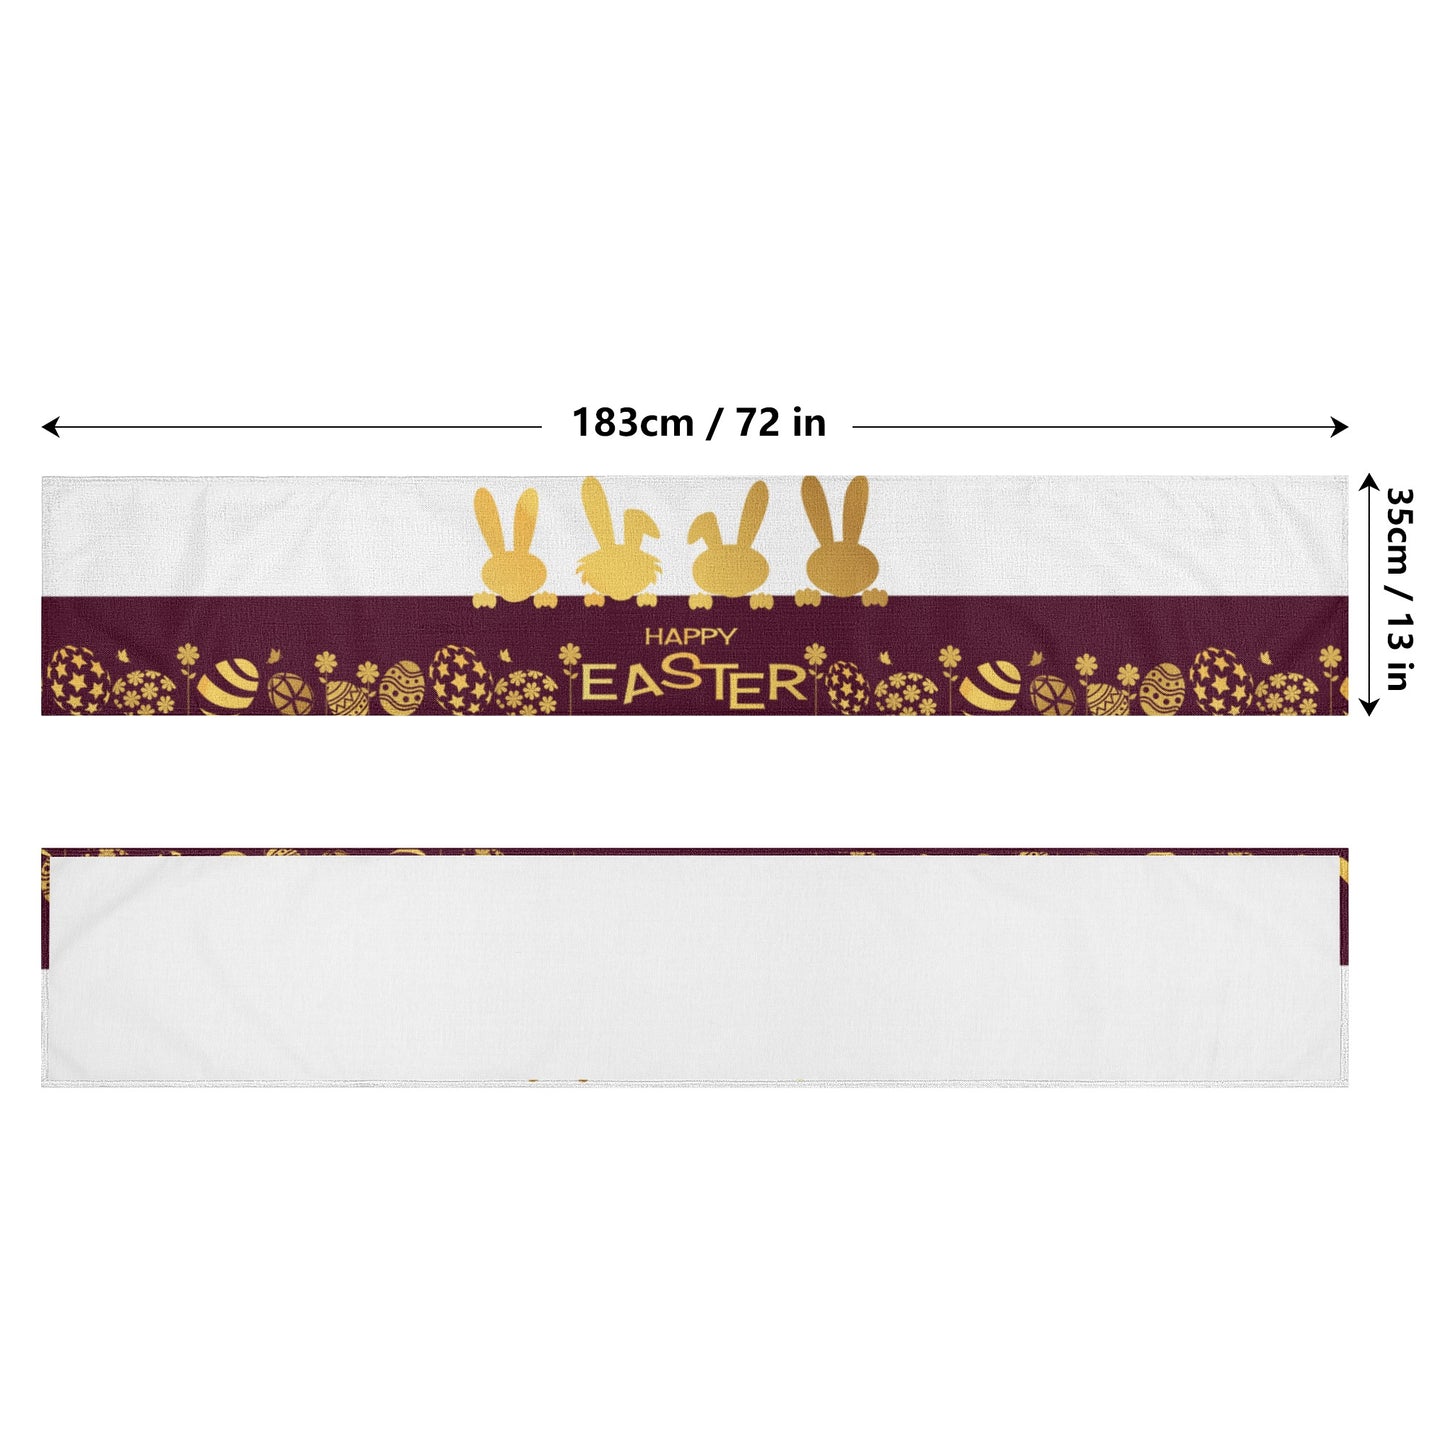 Bring Character and Charm to Your Table with These 4 Little Bunnies on The Gorgeous Table Runner